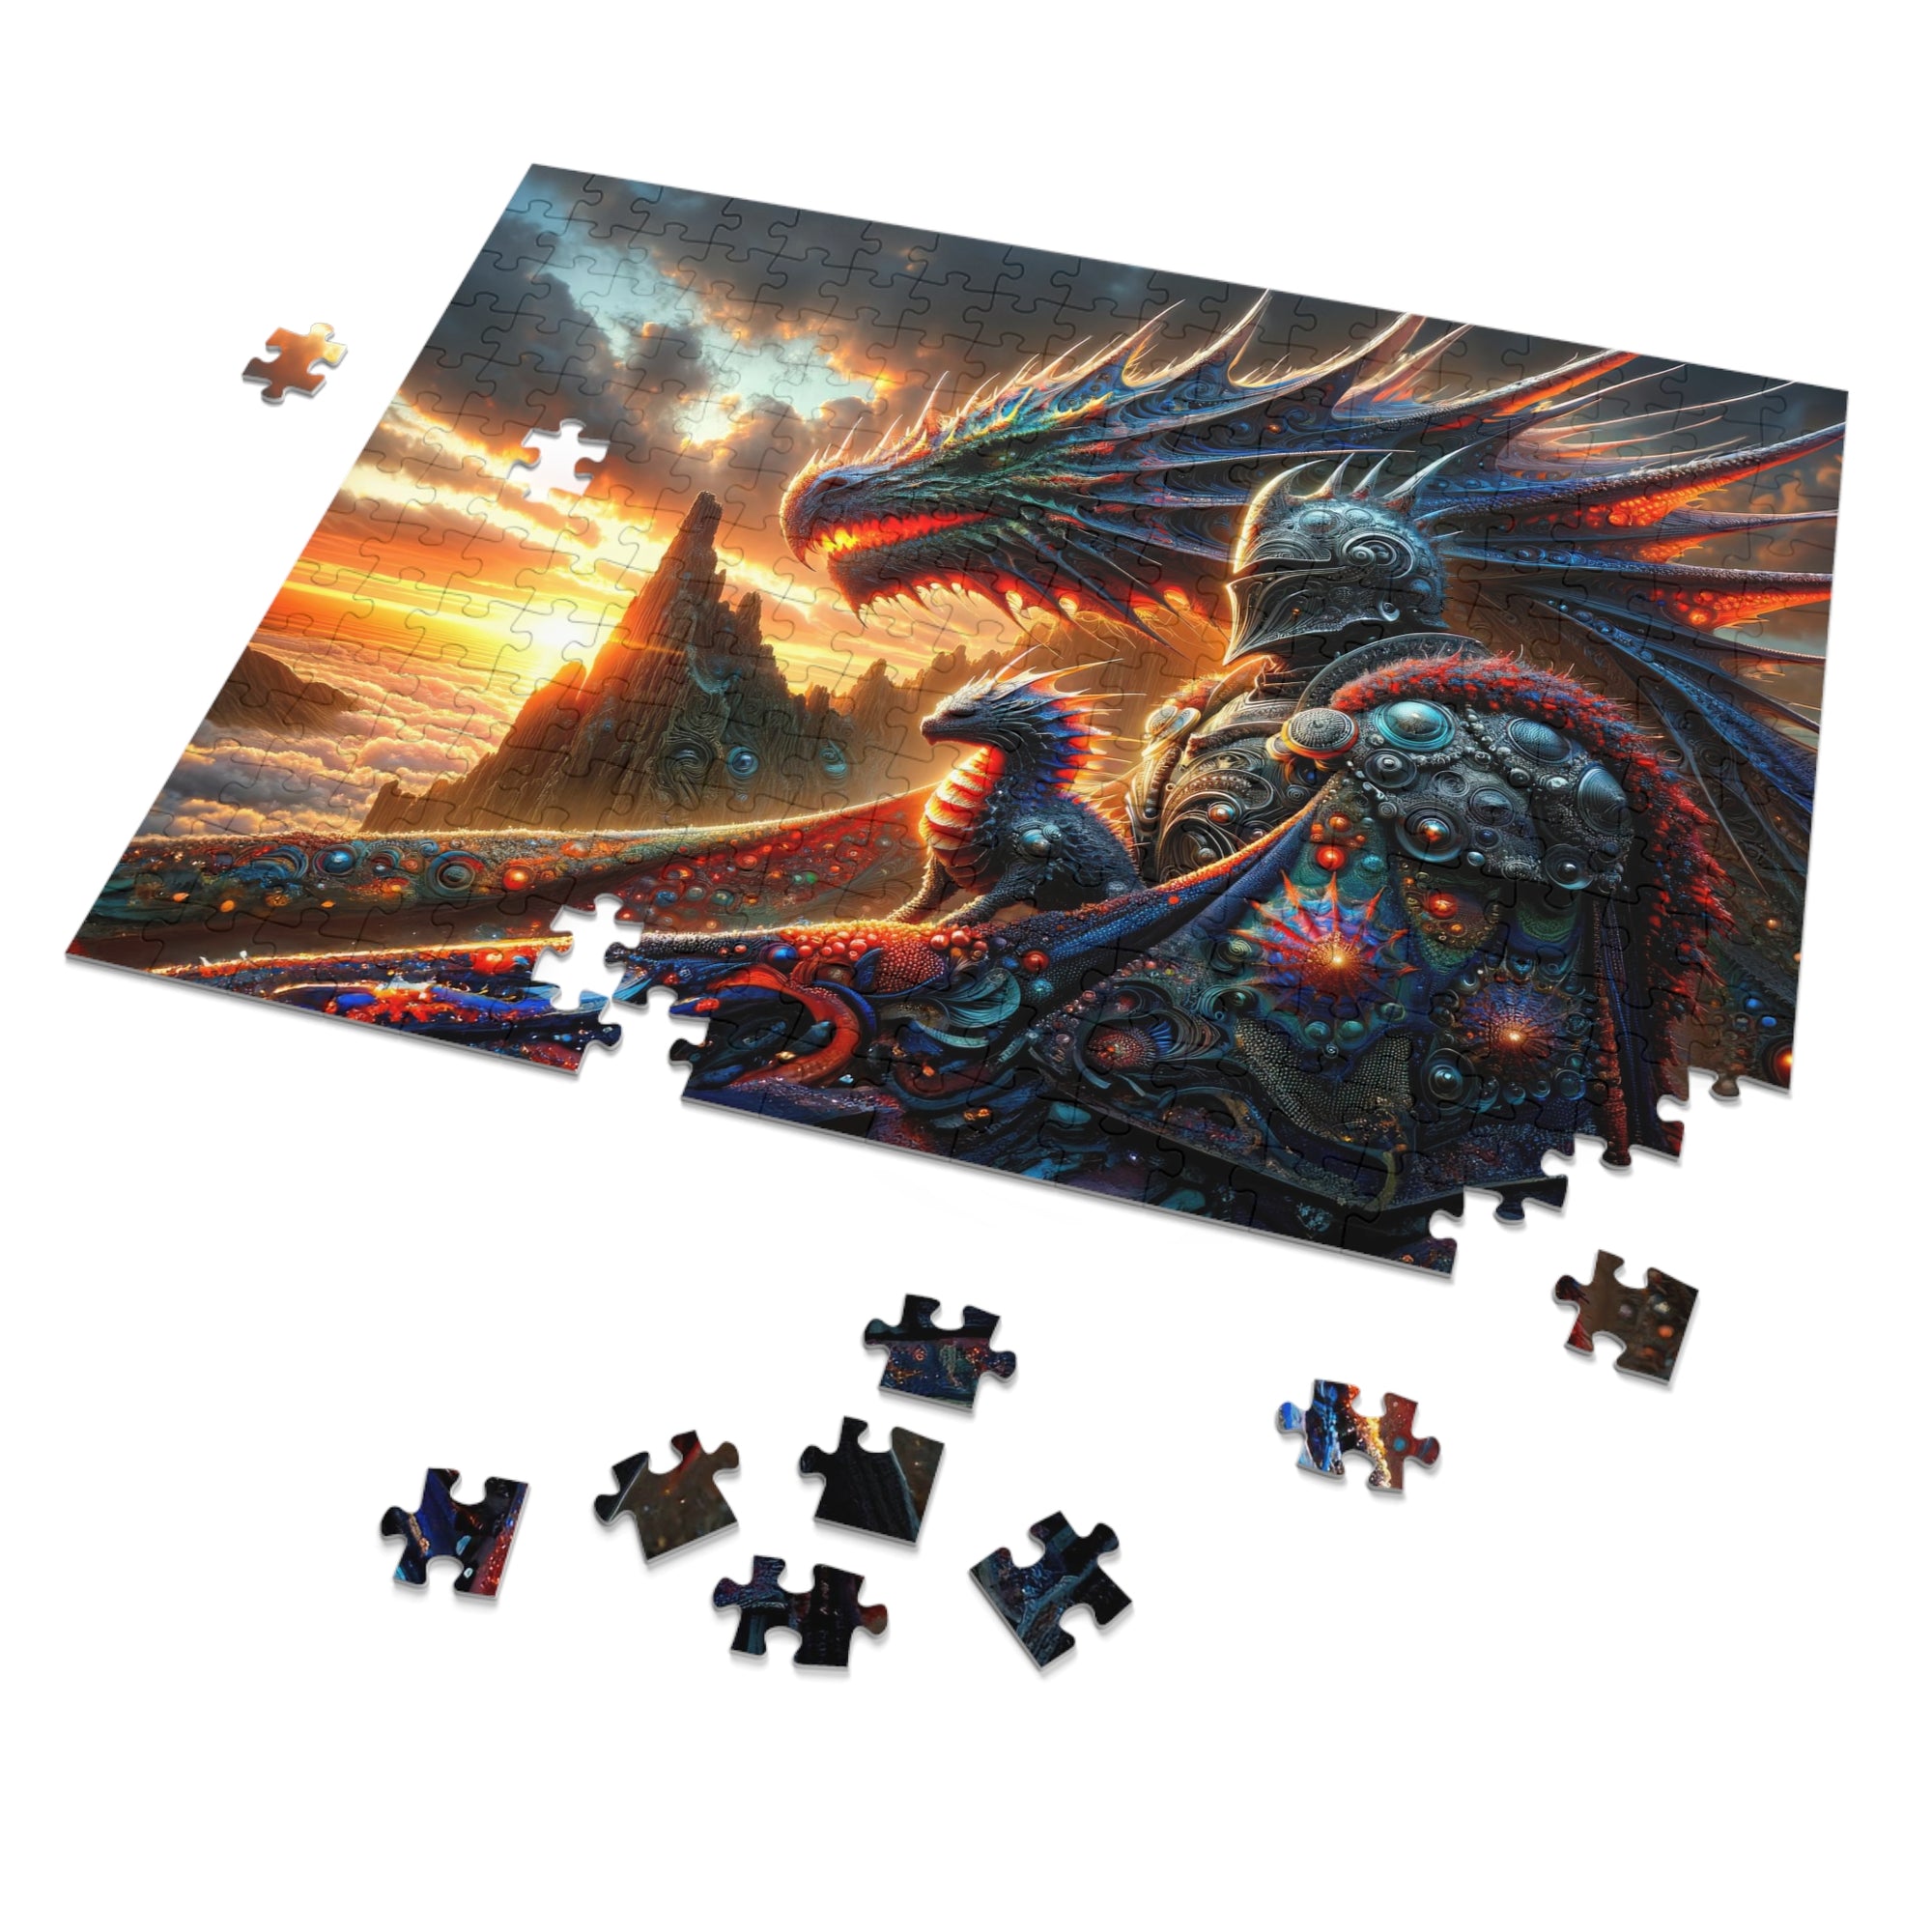 The Guardian's Dawn Jigsaw Puzzle